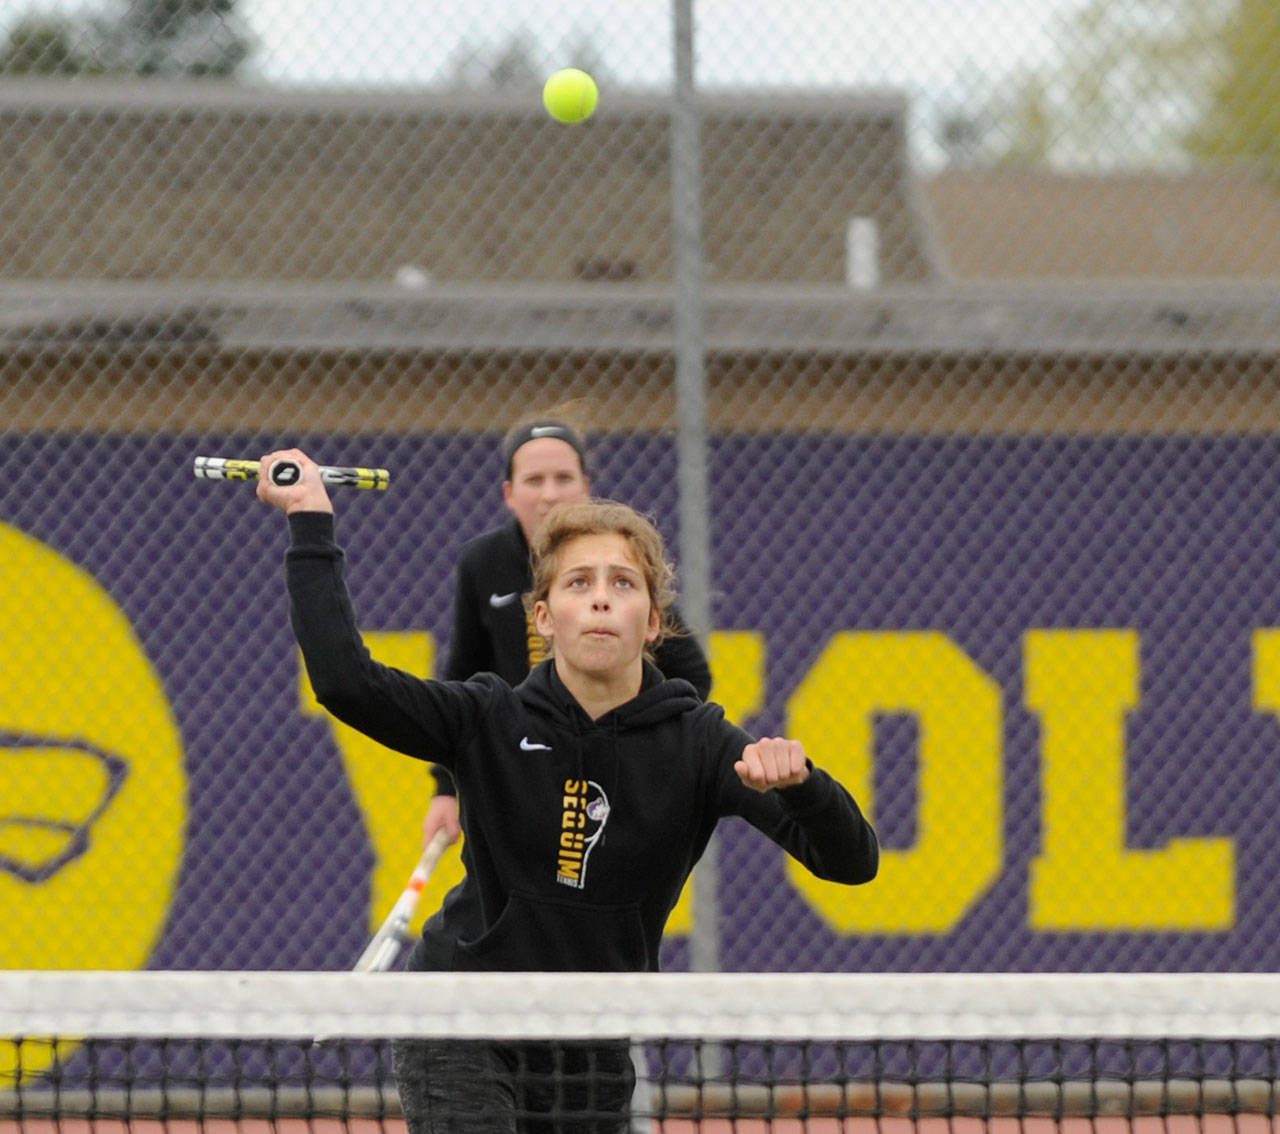 Girls tennis: Wolves clinch league title with wins